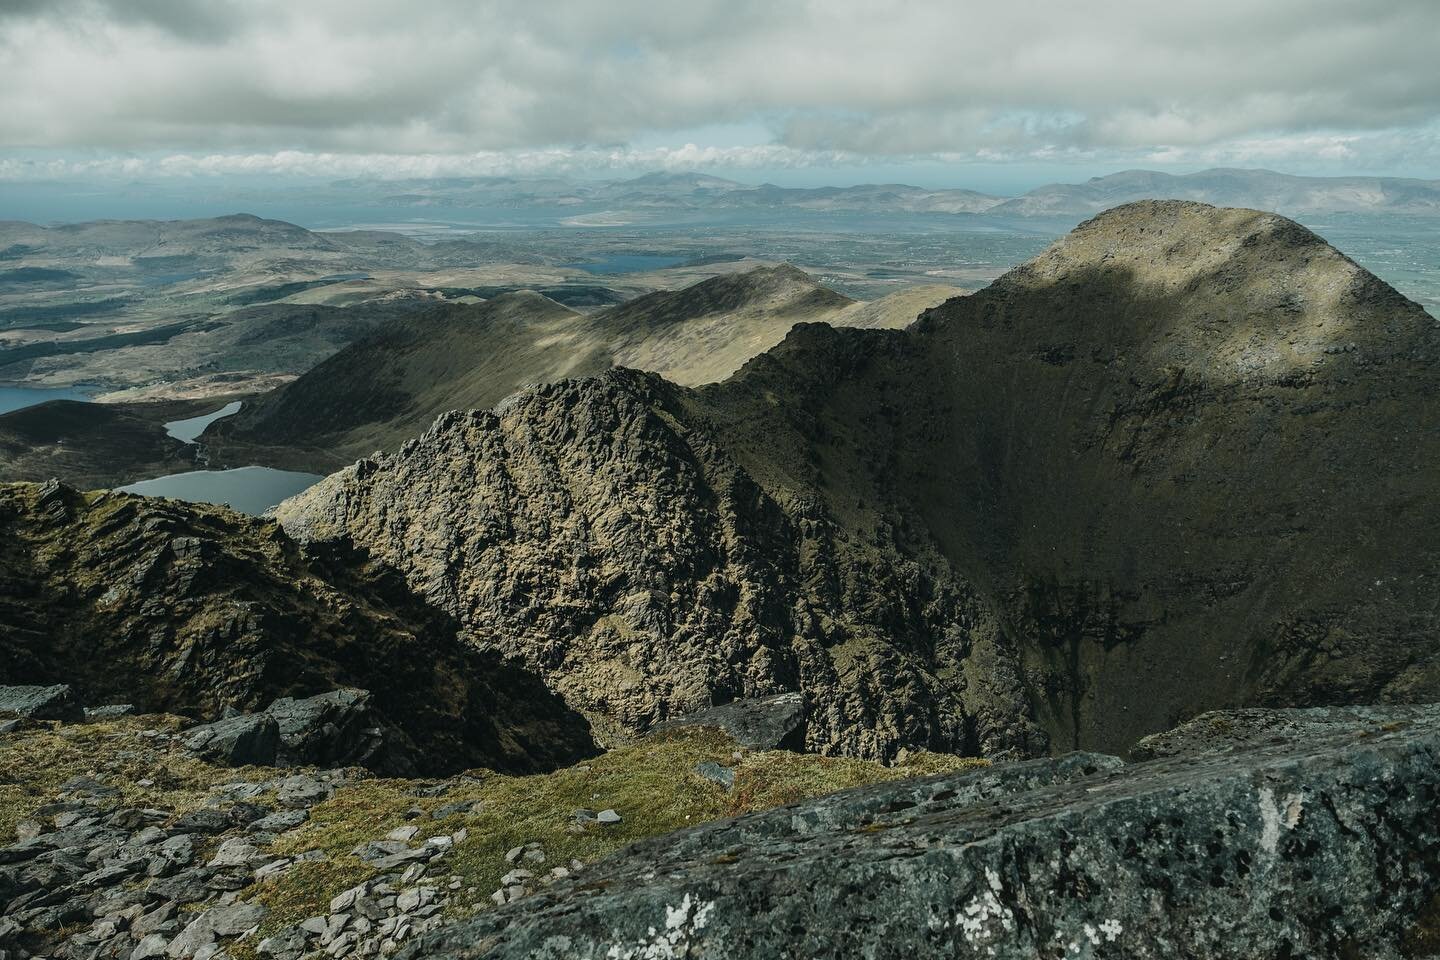 The view from Carrountoohil, the top of Ireland.